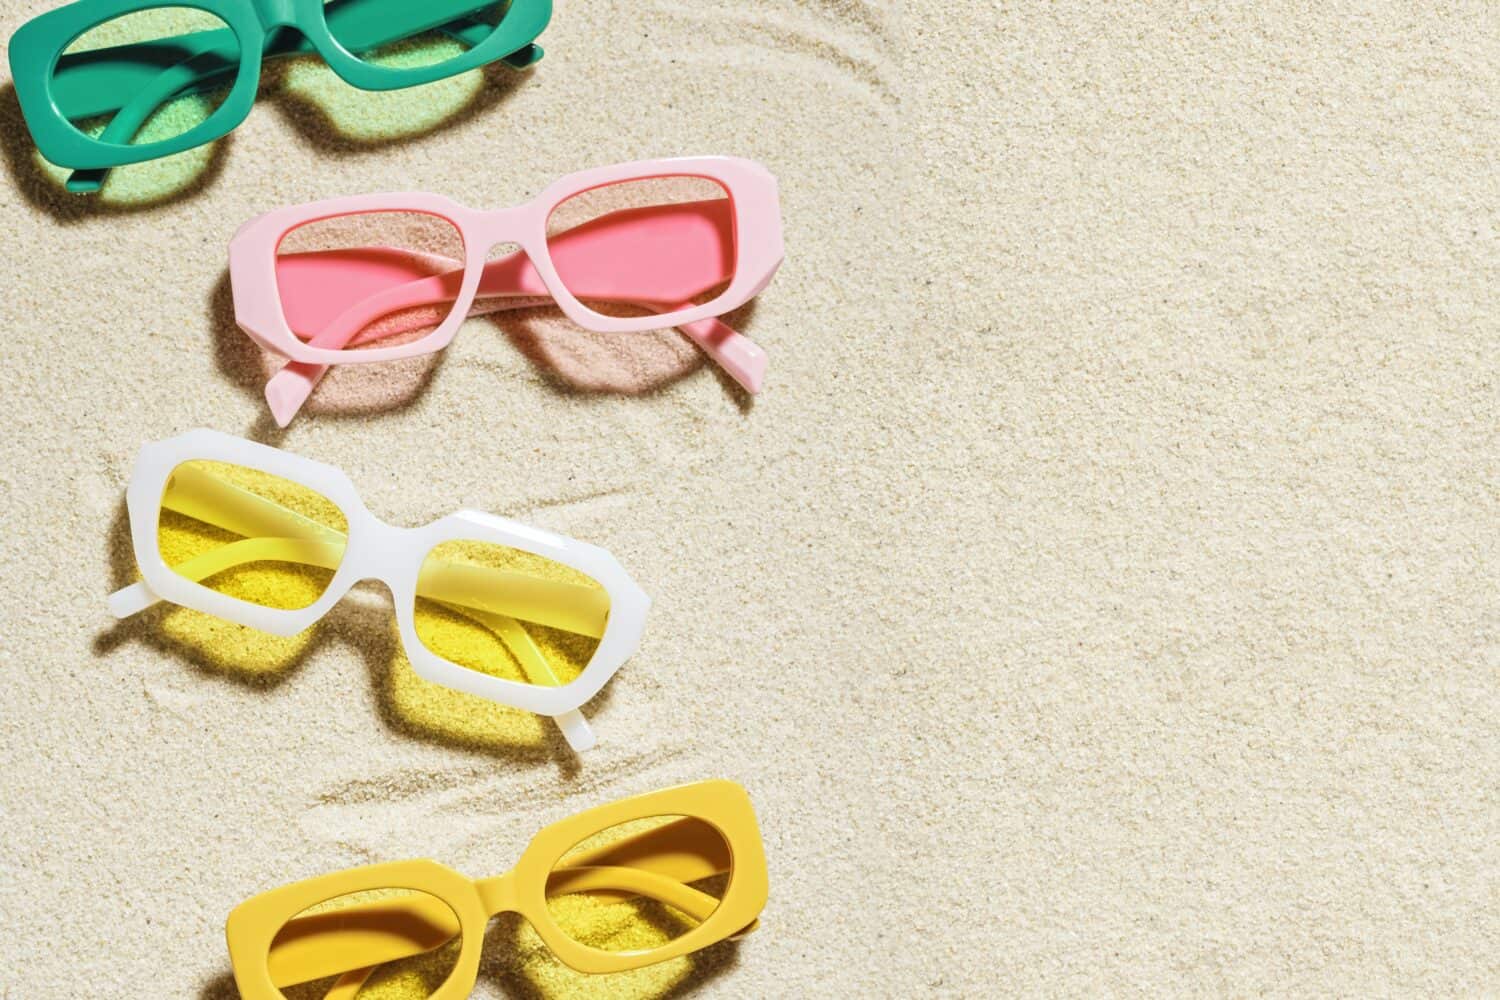 Set of colorful sunglasses on beach sand background at sunlight with shadow. Summer fashion eyeglasses with colored glass. Summer vacation, summer rest concept. Minimal style flat lay, copy space